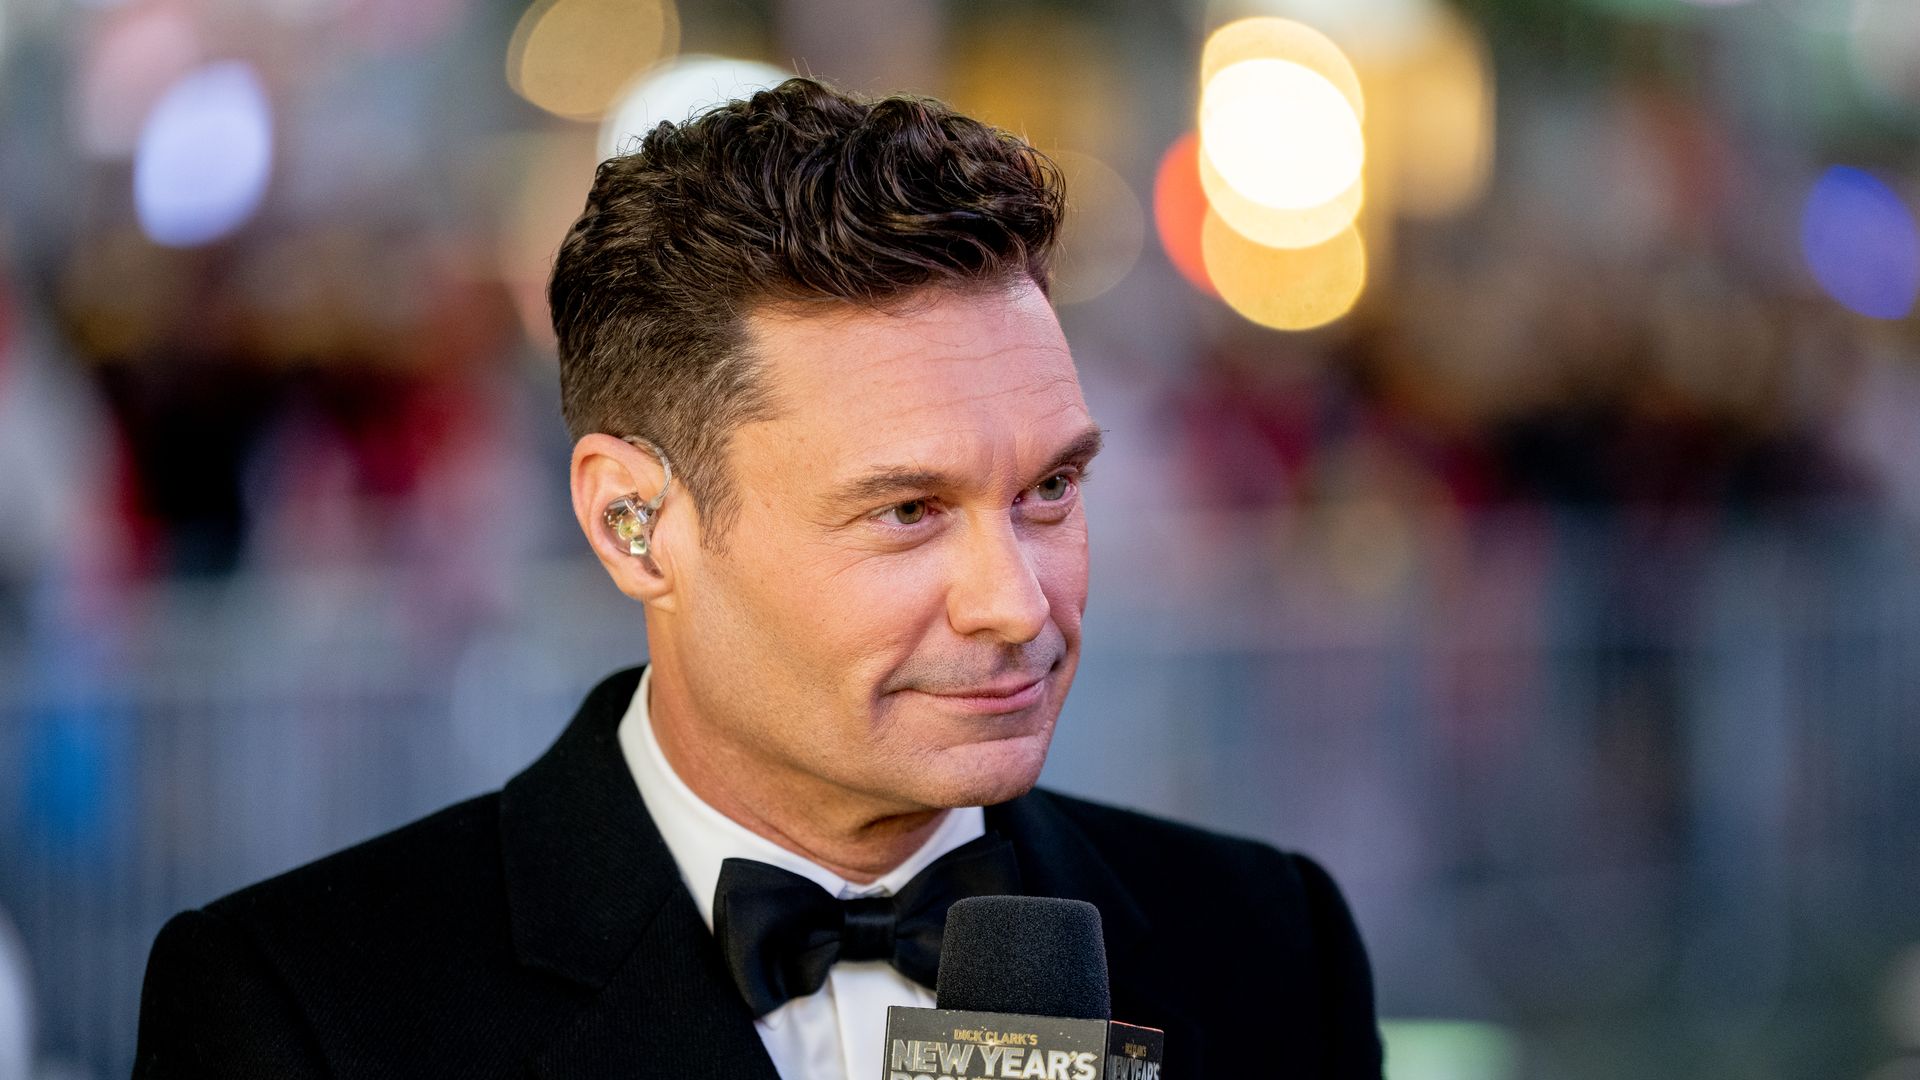 Ryan Seacrest hosts the Times Square New Years Eve Celebration on December 31, 2021 in New York City